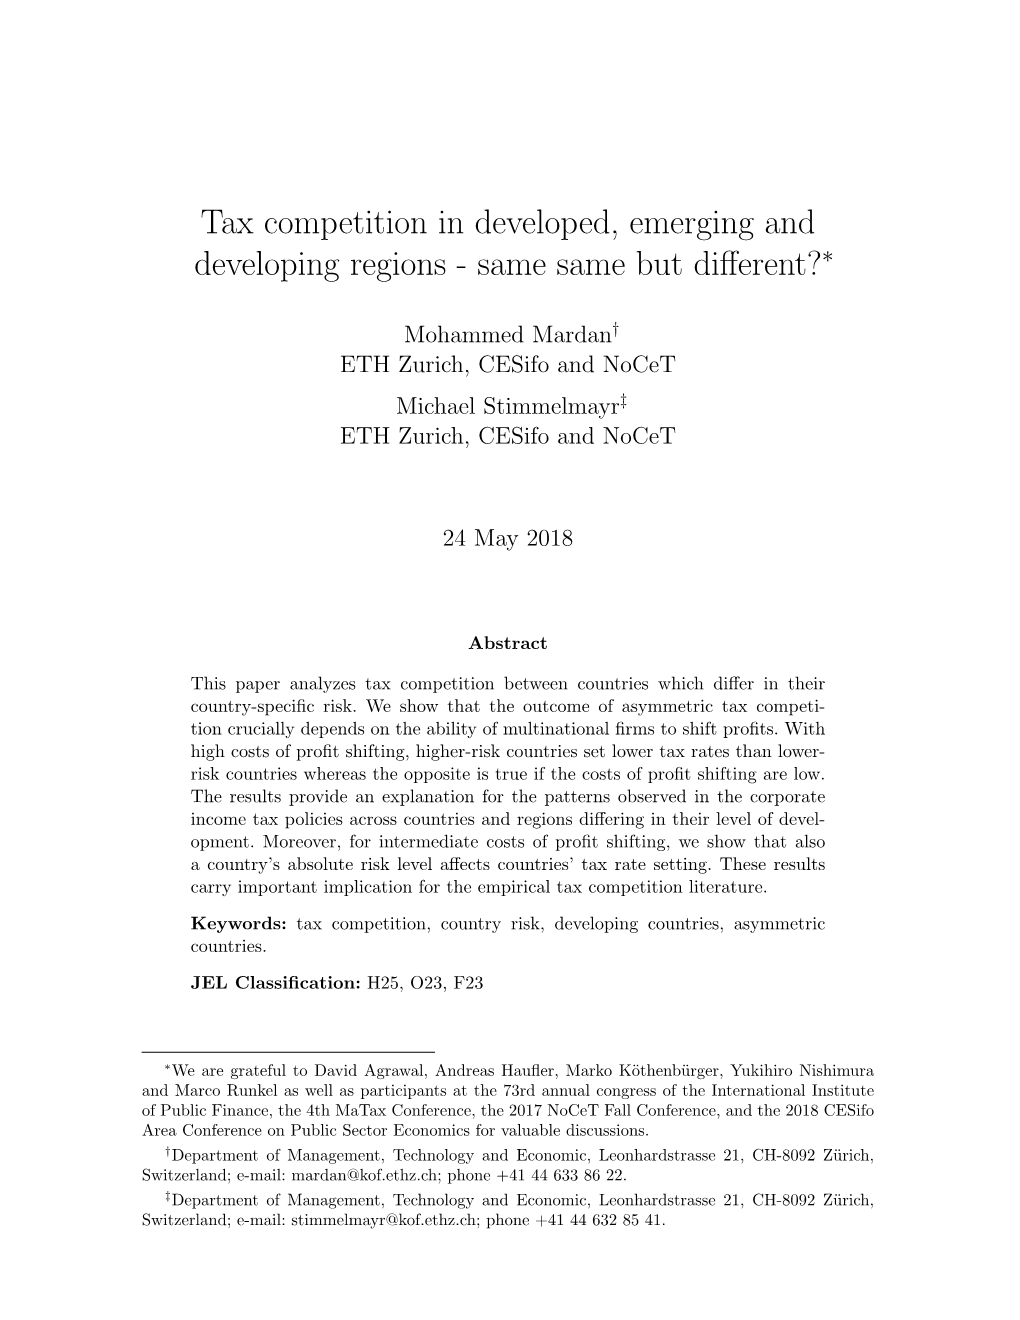 Tax Competition in Developed, Emerging and Developing Regions - Same Same but Diﬀerent?∗